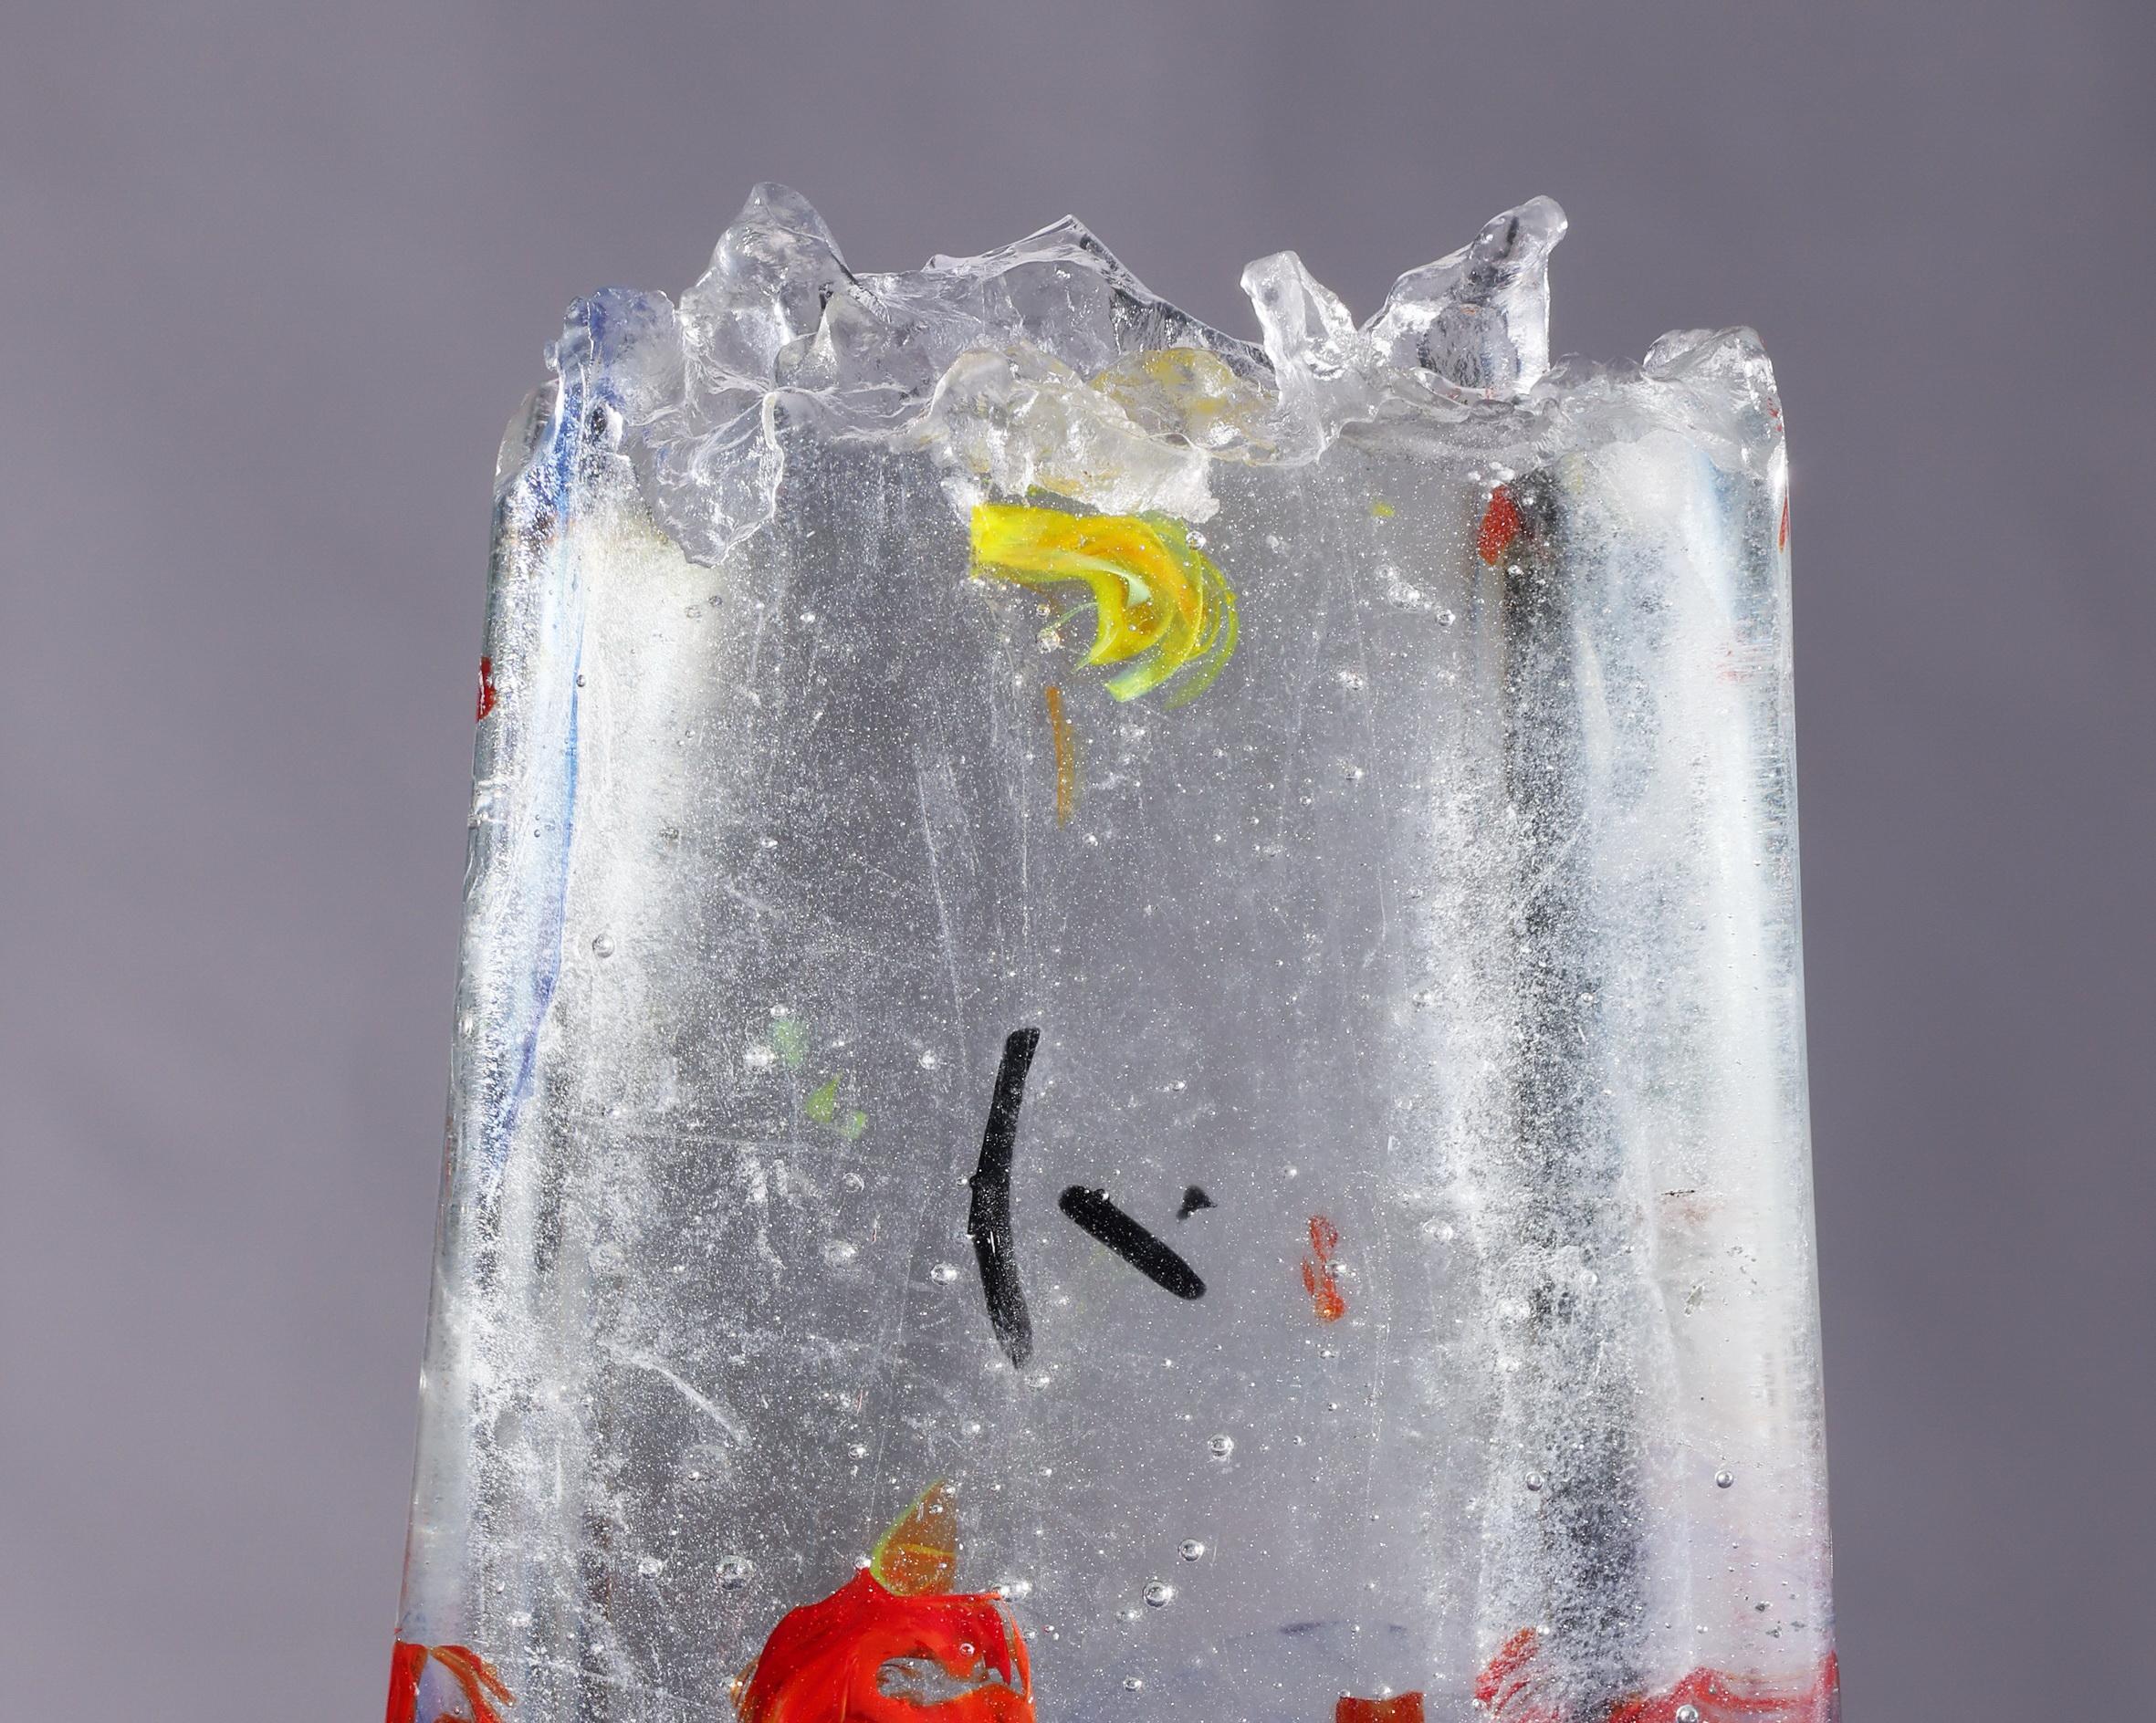 Abstract Cast Glass Sculpture, 'Kotu', 2023 by David Ruth For Sale 1